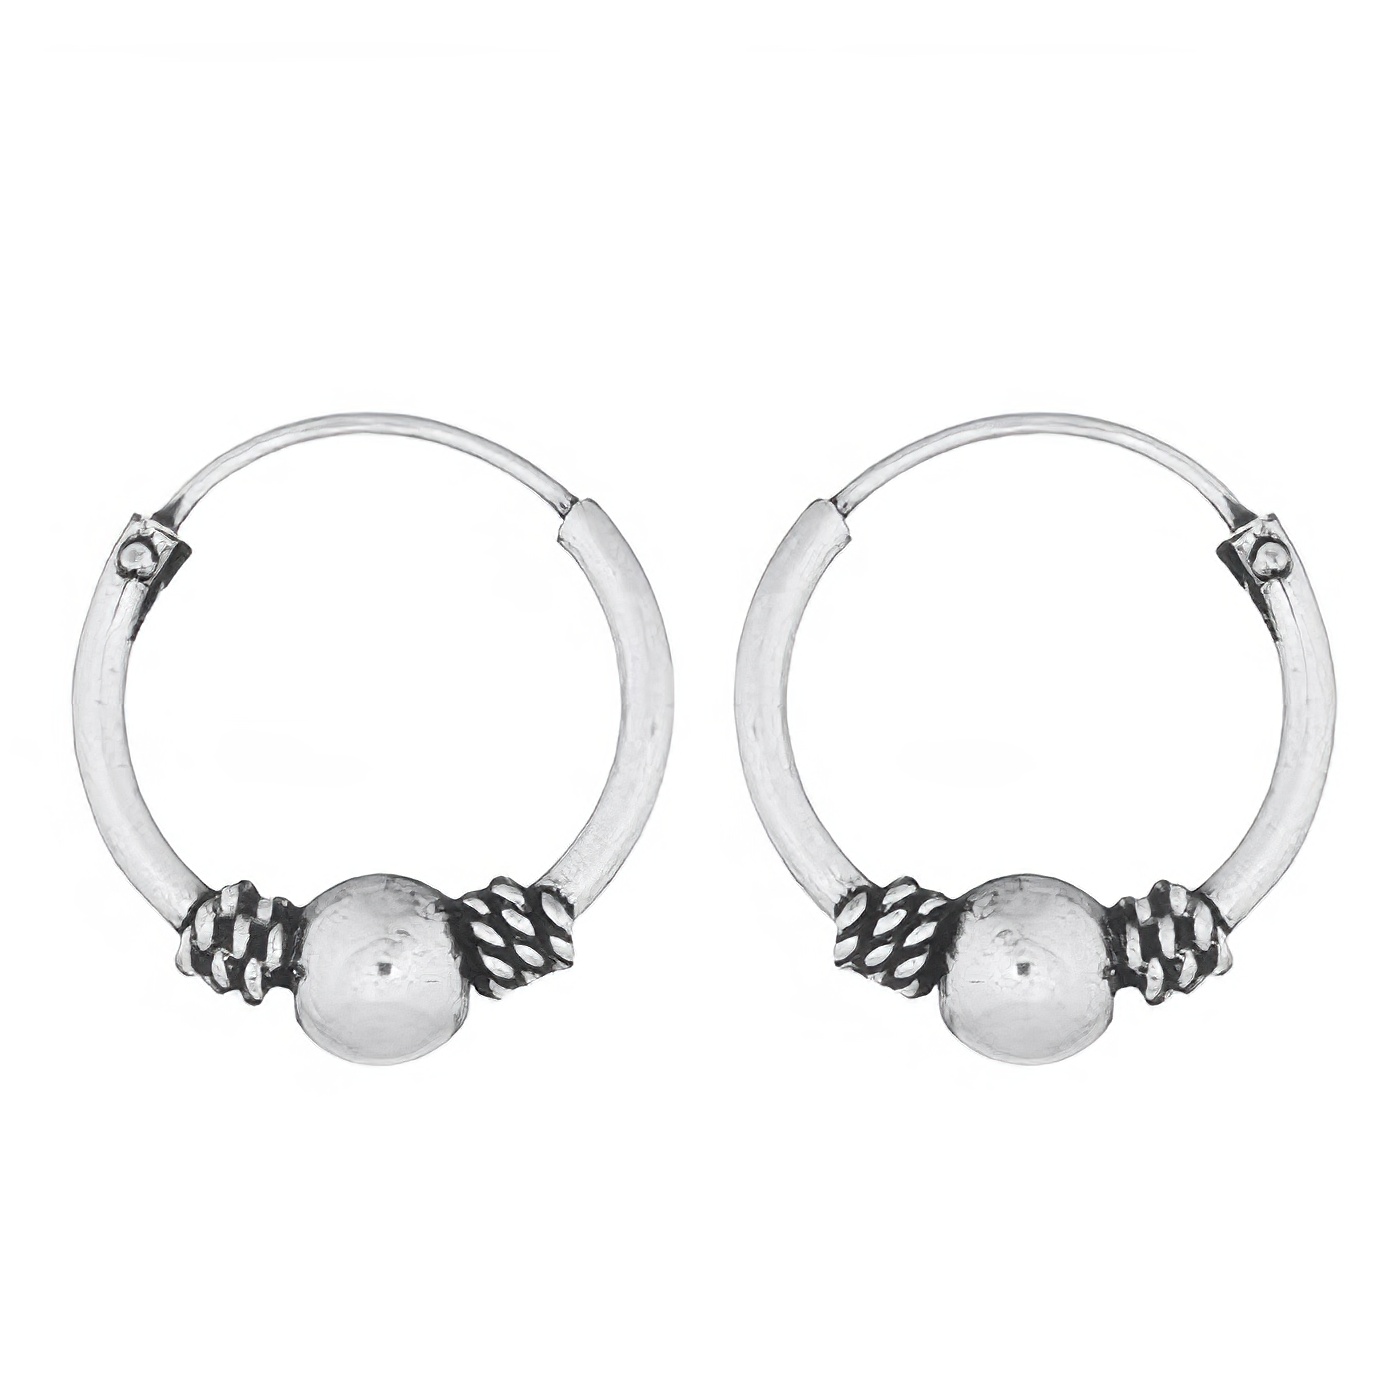 Centre Ball Twisted Bali Wire Small Hoop Earrings Silver 925 by BeYindi 